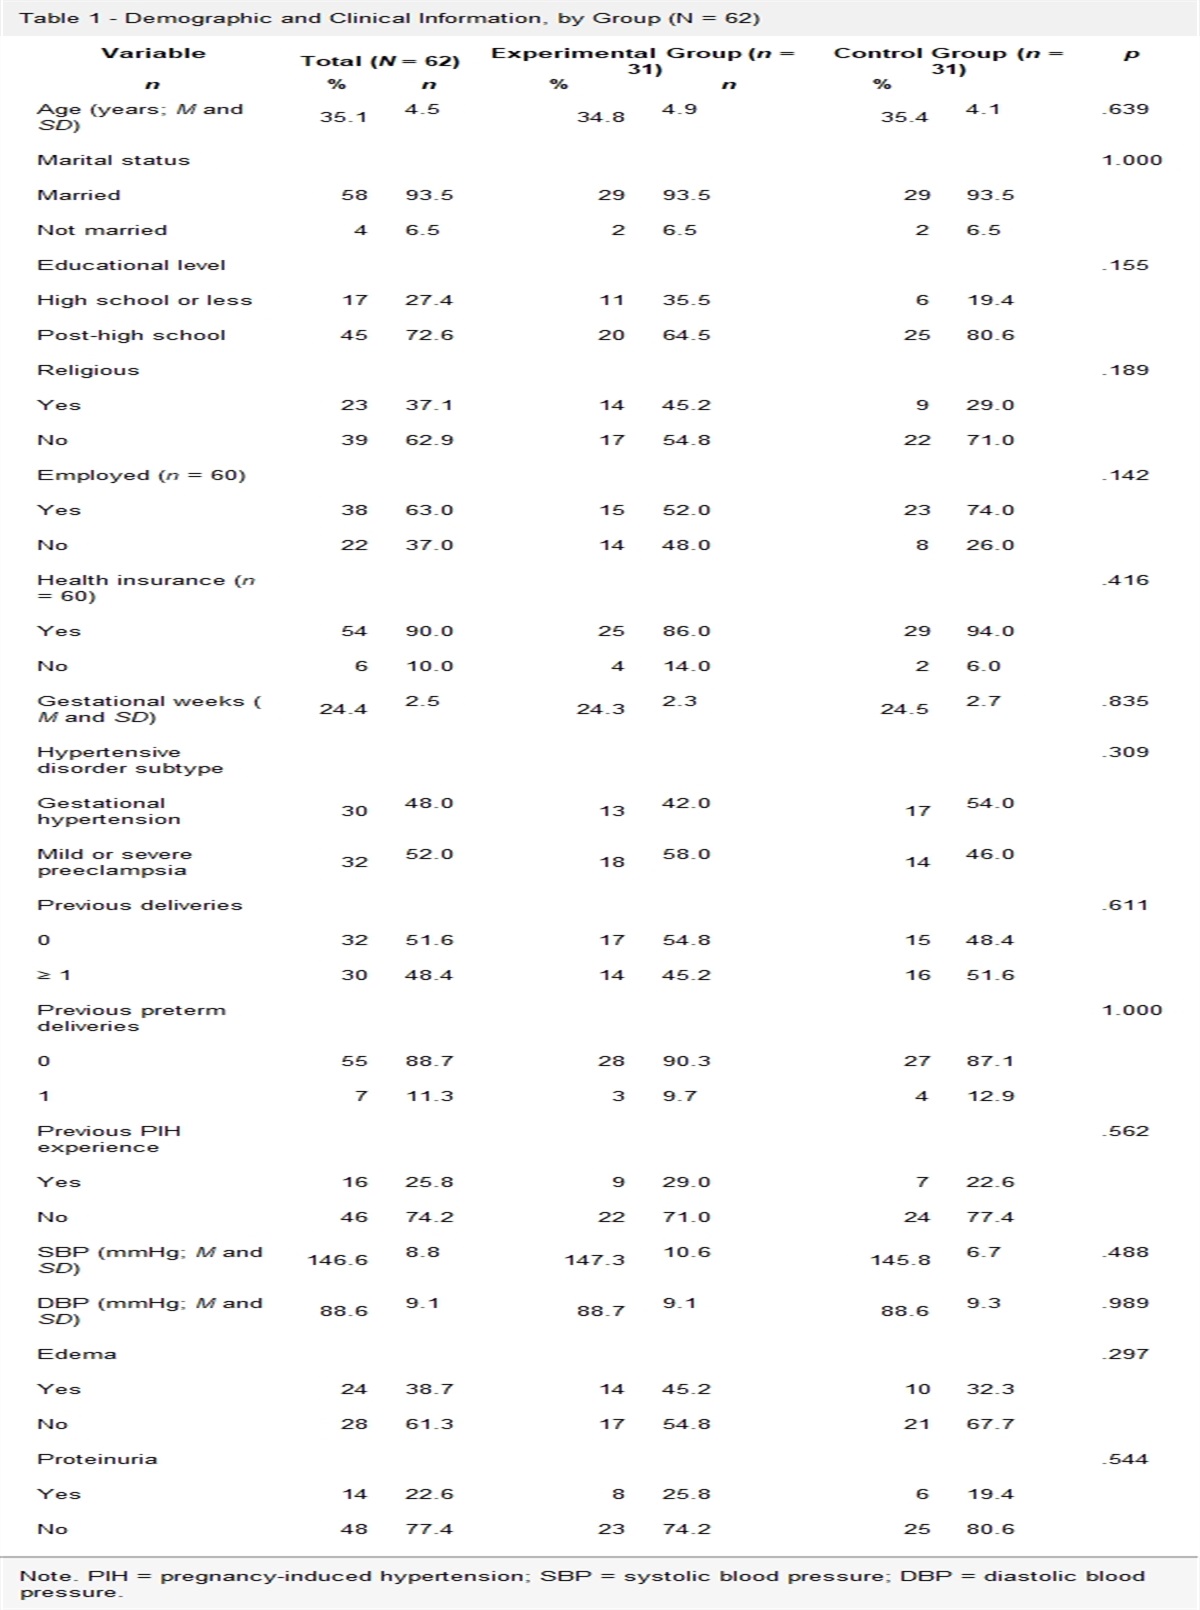 Effects of a Case Management Program for Women With Pregnancy-Induced Hypertension